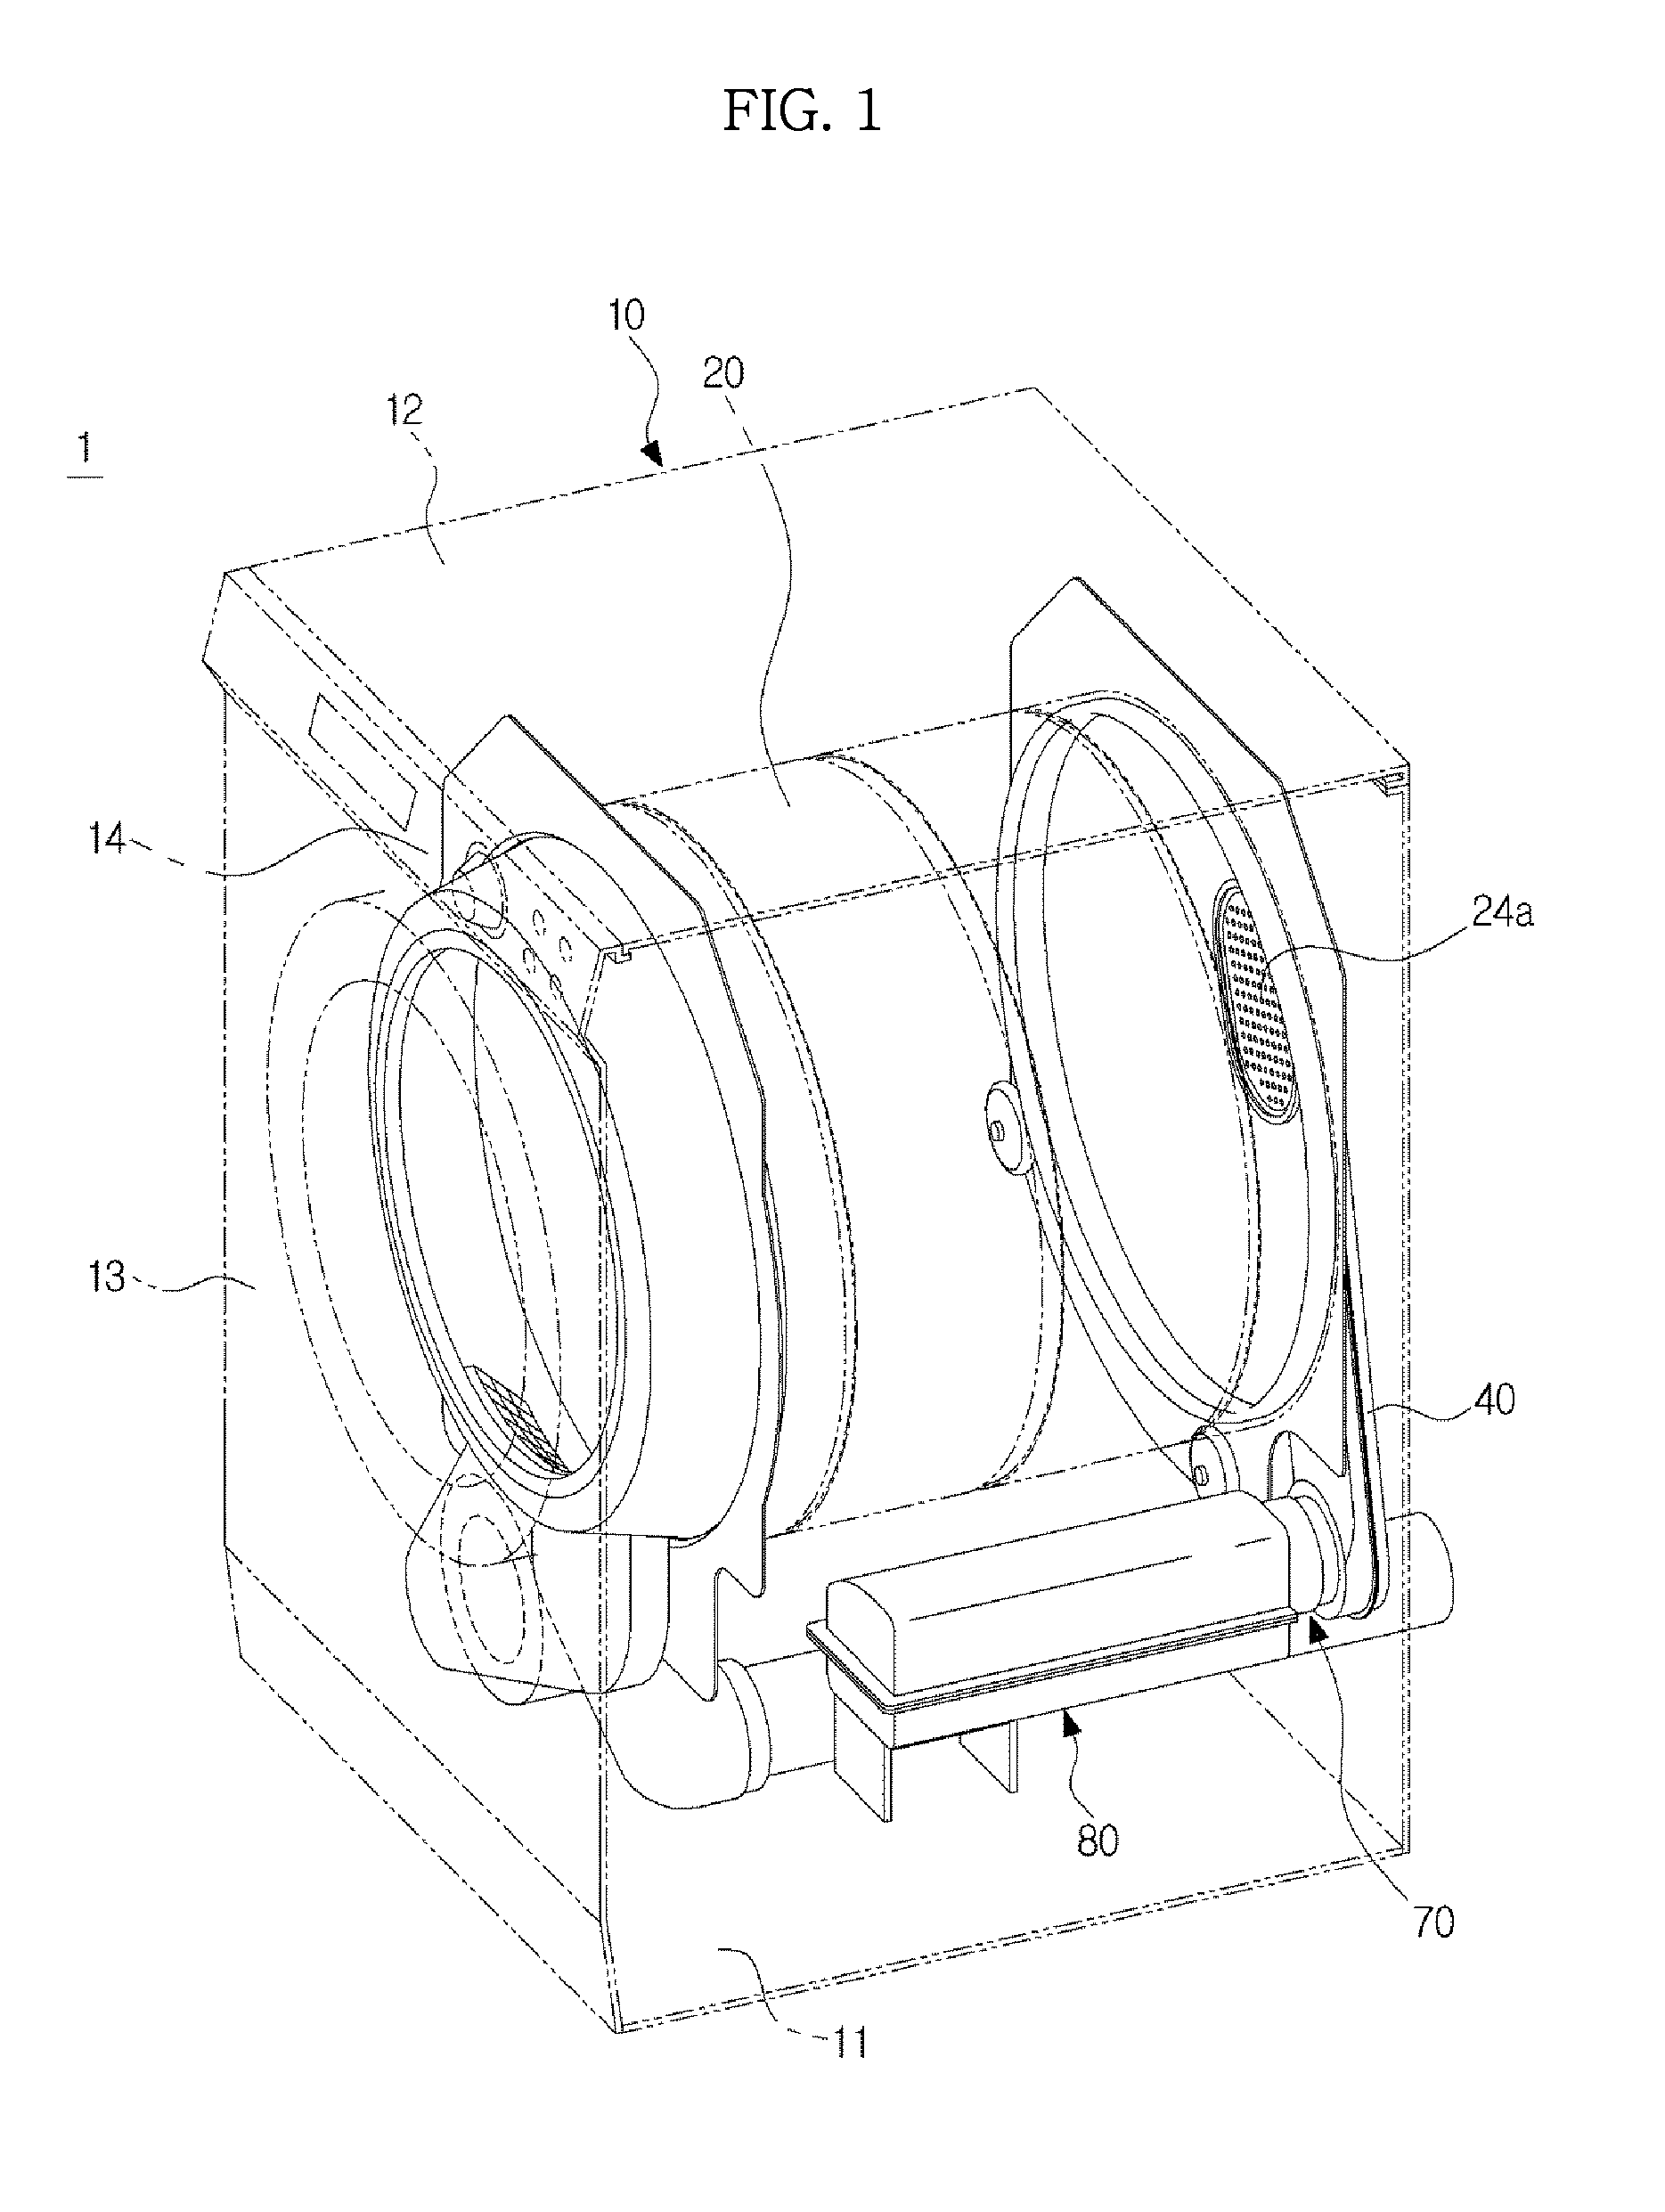 Clothing dryer and blockage detection method thereof